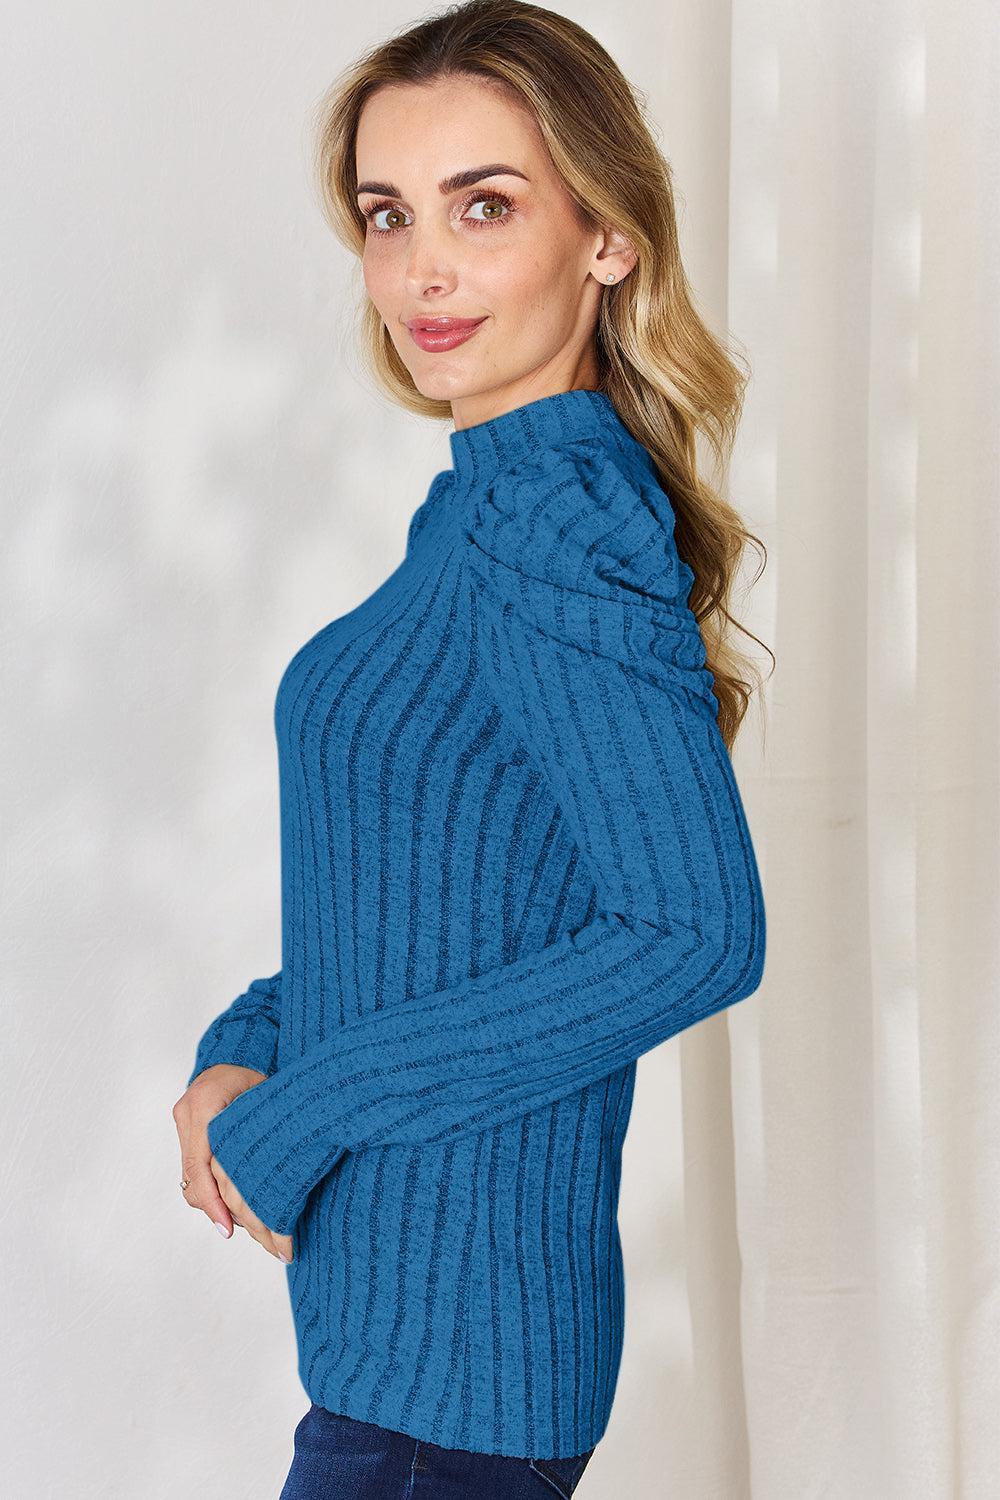 a woman in a blue sweater posing for a picture